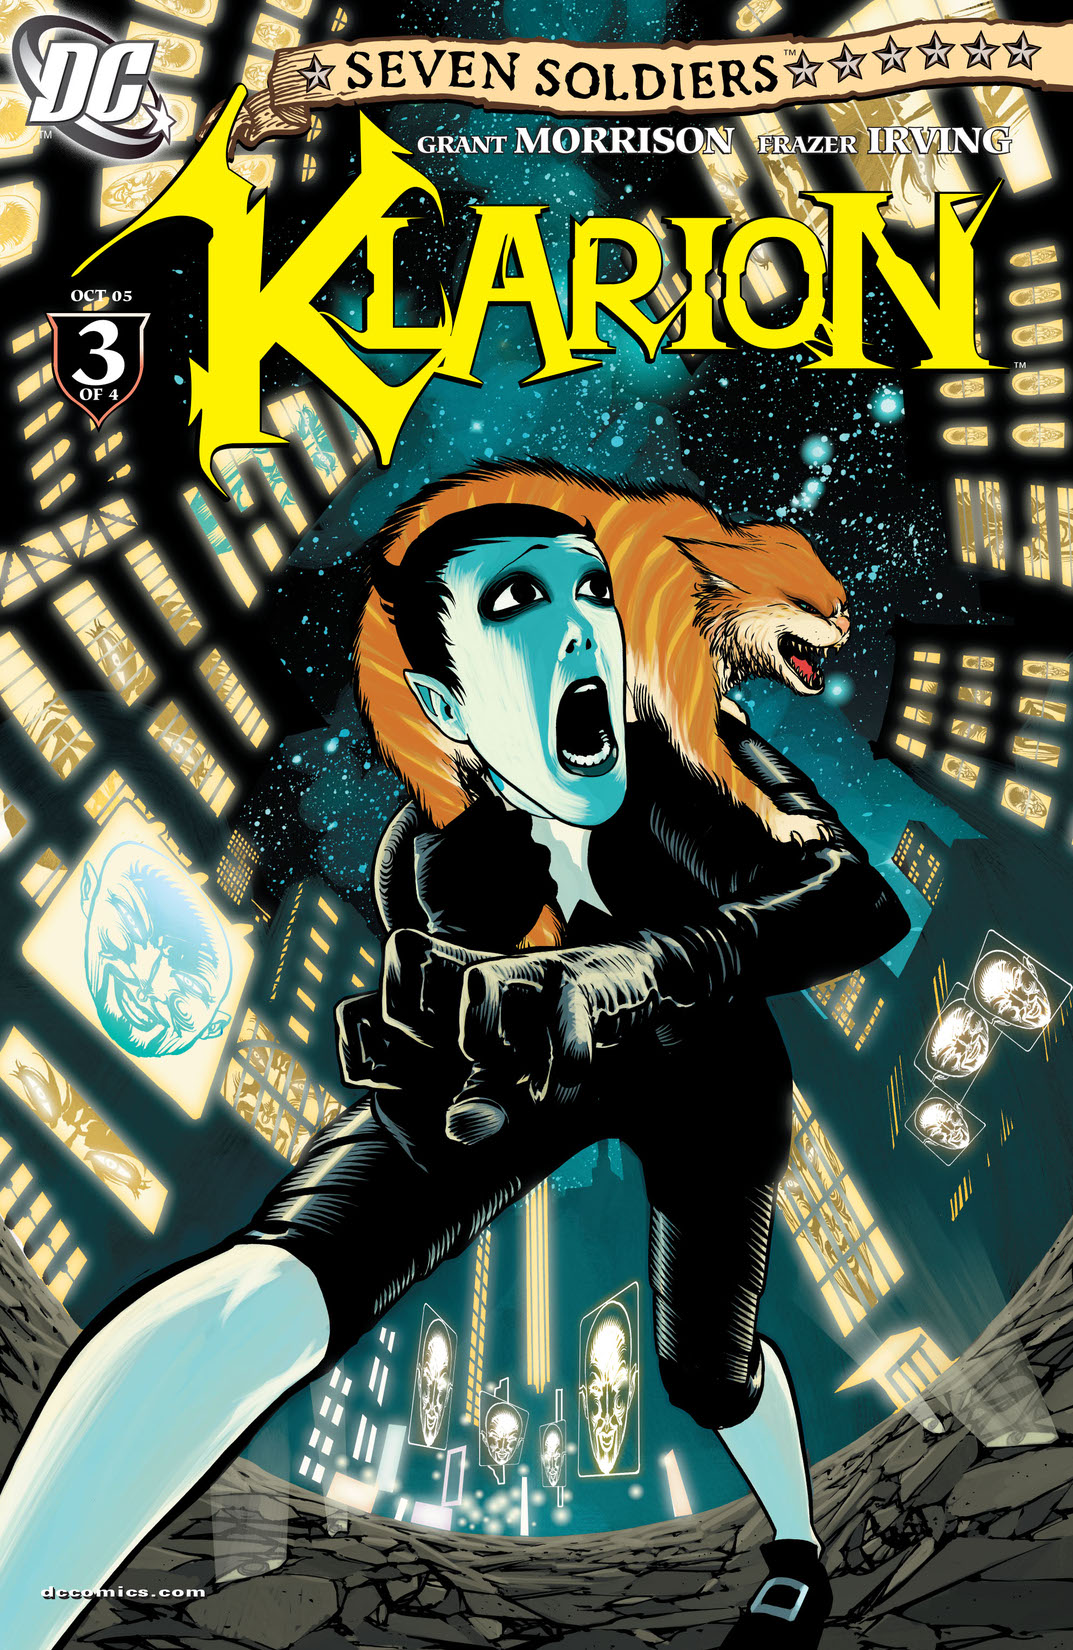 Seven Soldiers: Klarion the Witch Boy #3 preview images